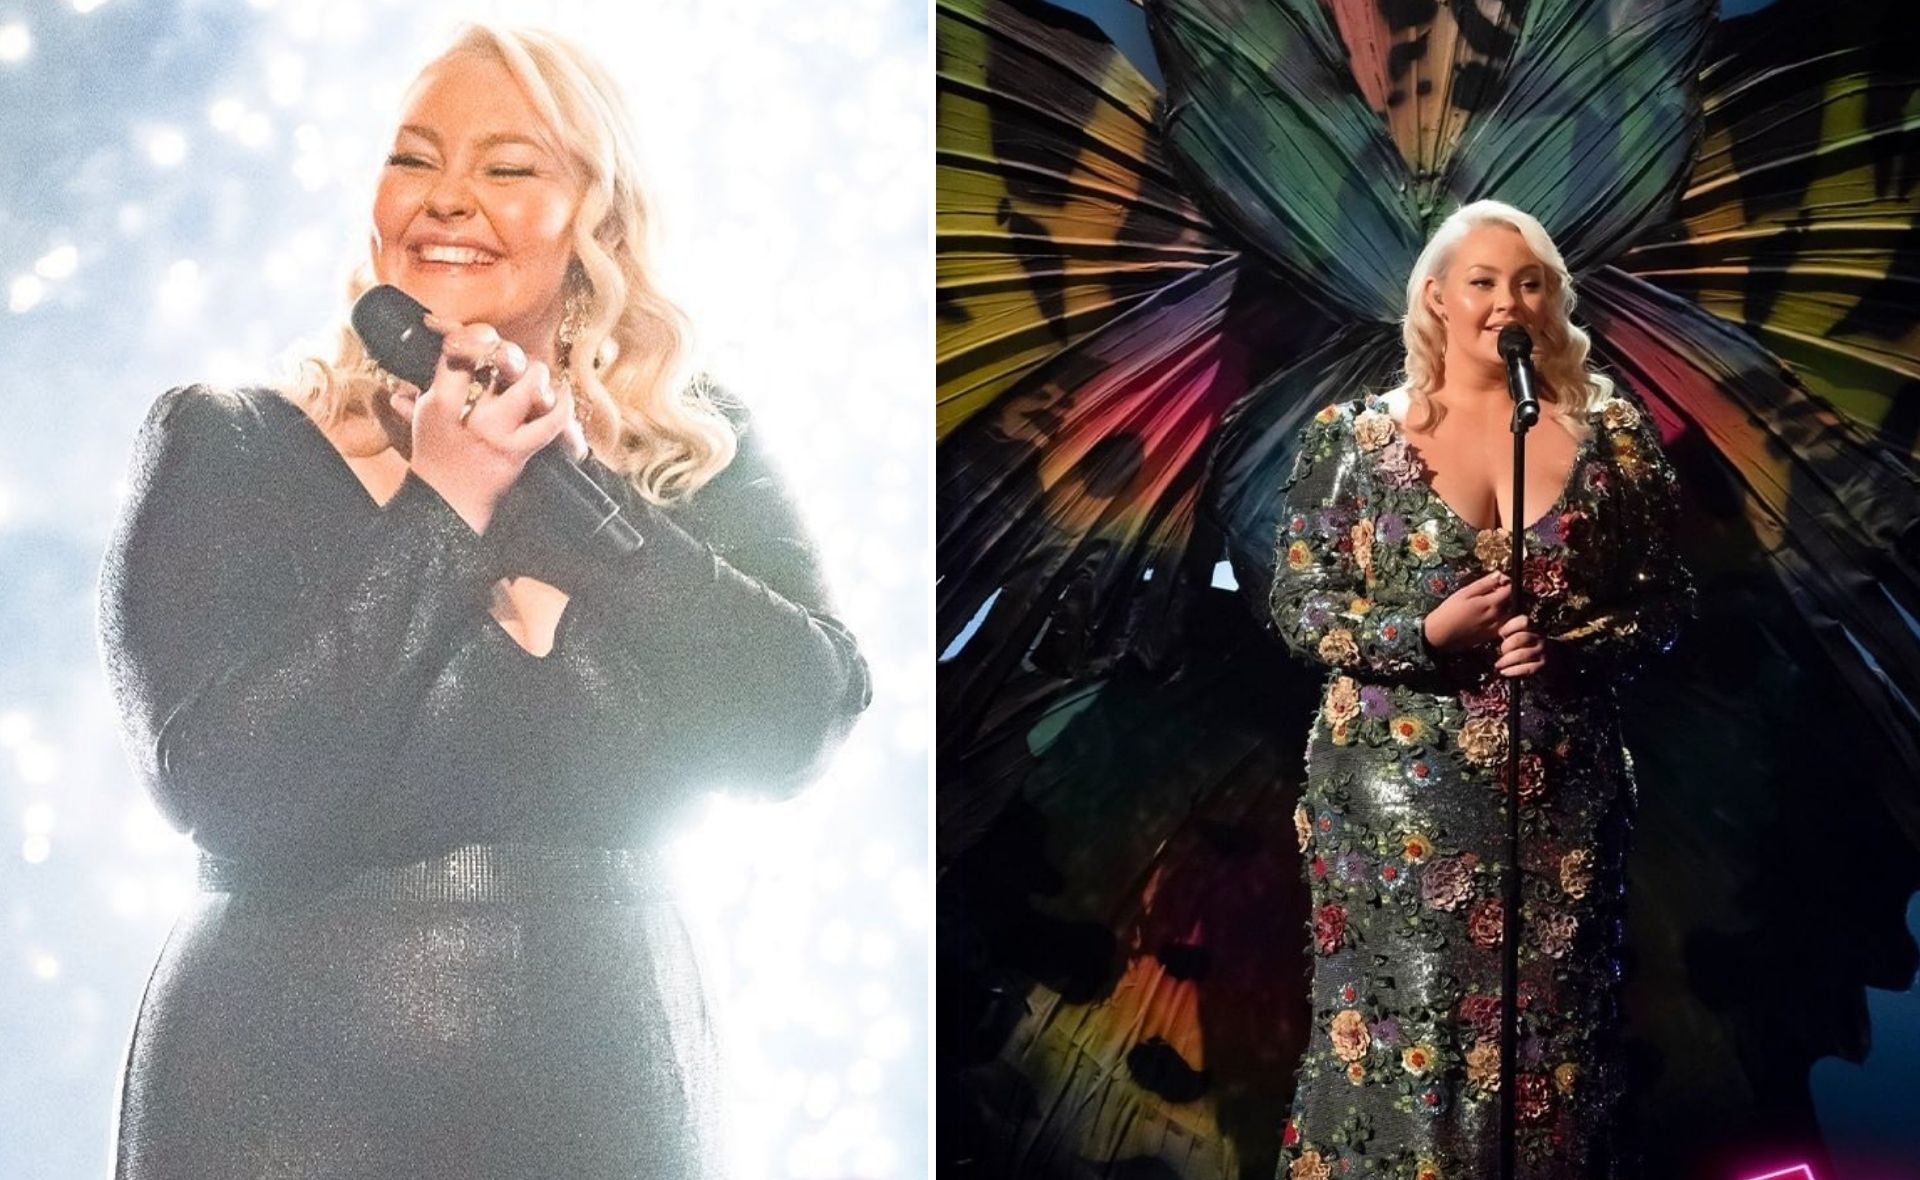 EXCLUSIVE: After COVID left Bella Taylor Smith unemployed and unable to pay rent, winning The Voice means more to her than most